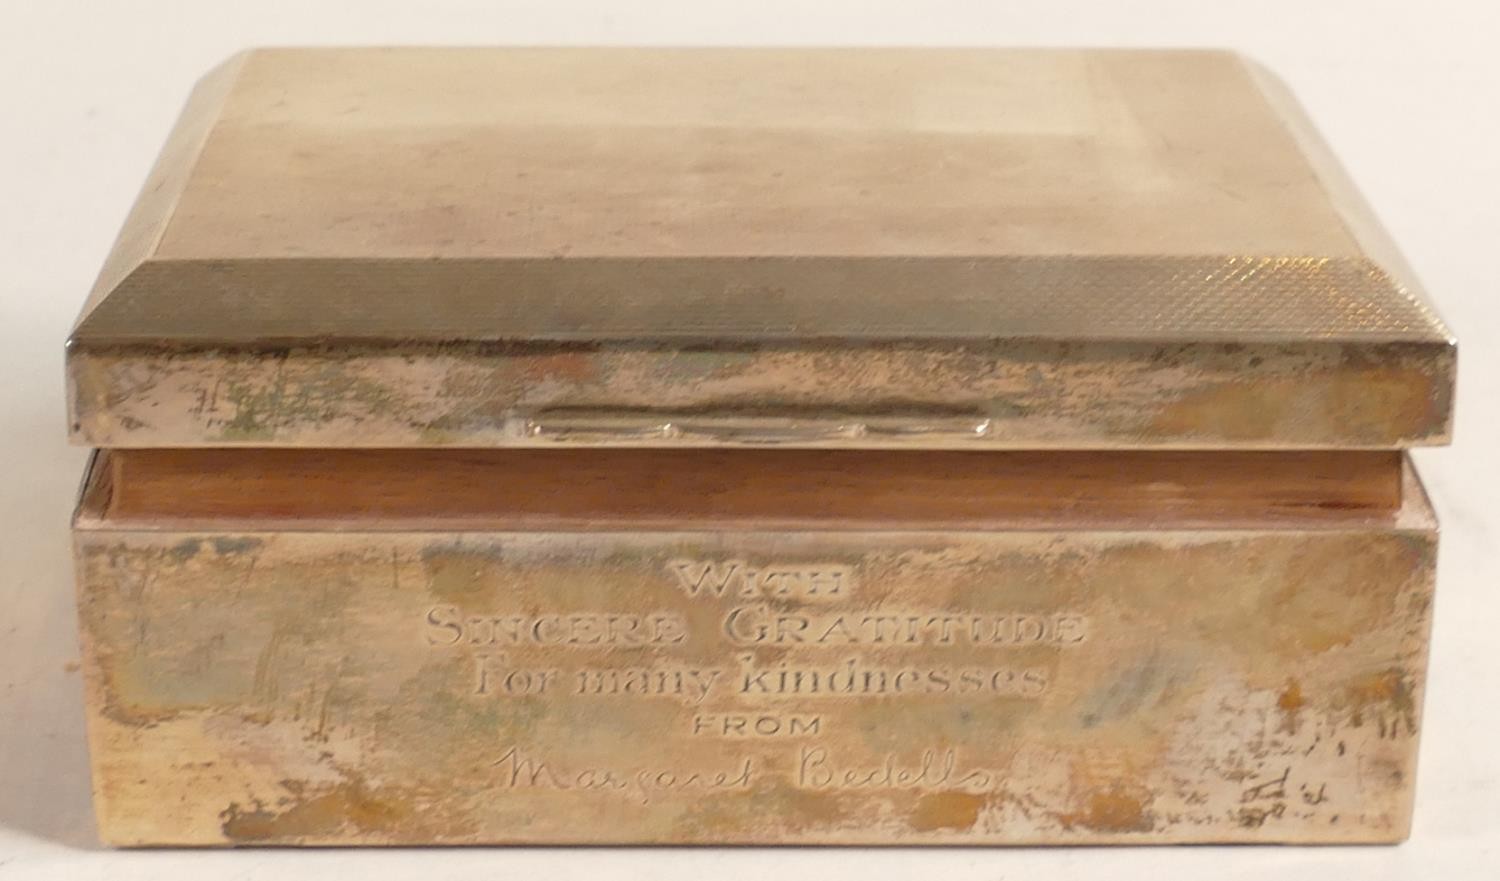 Hallmarked silver cigarette box, with engraved dedication to front. Gross weight 424.3g including